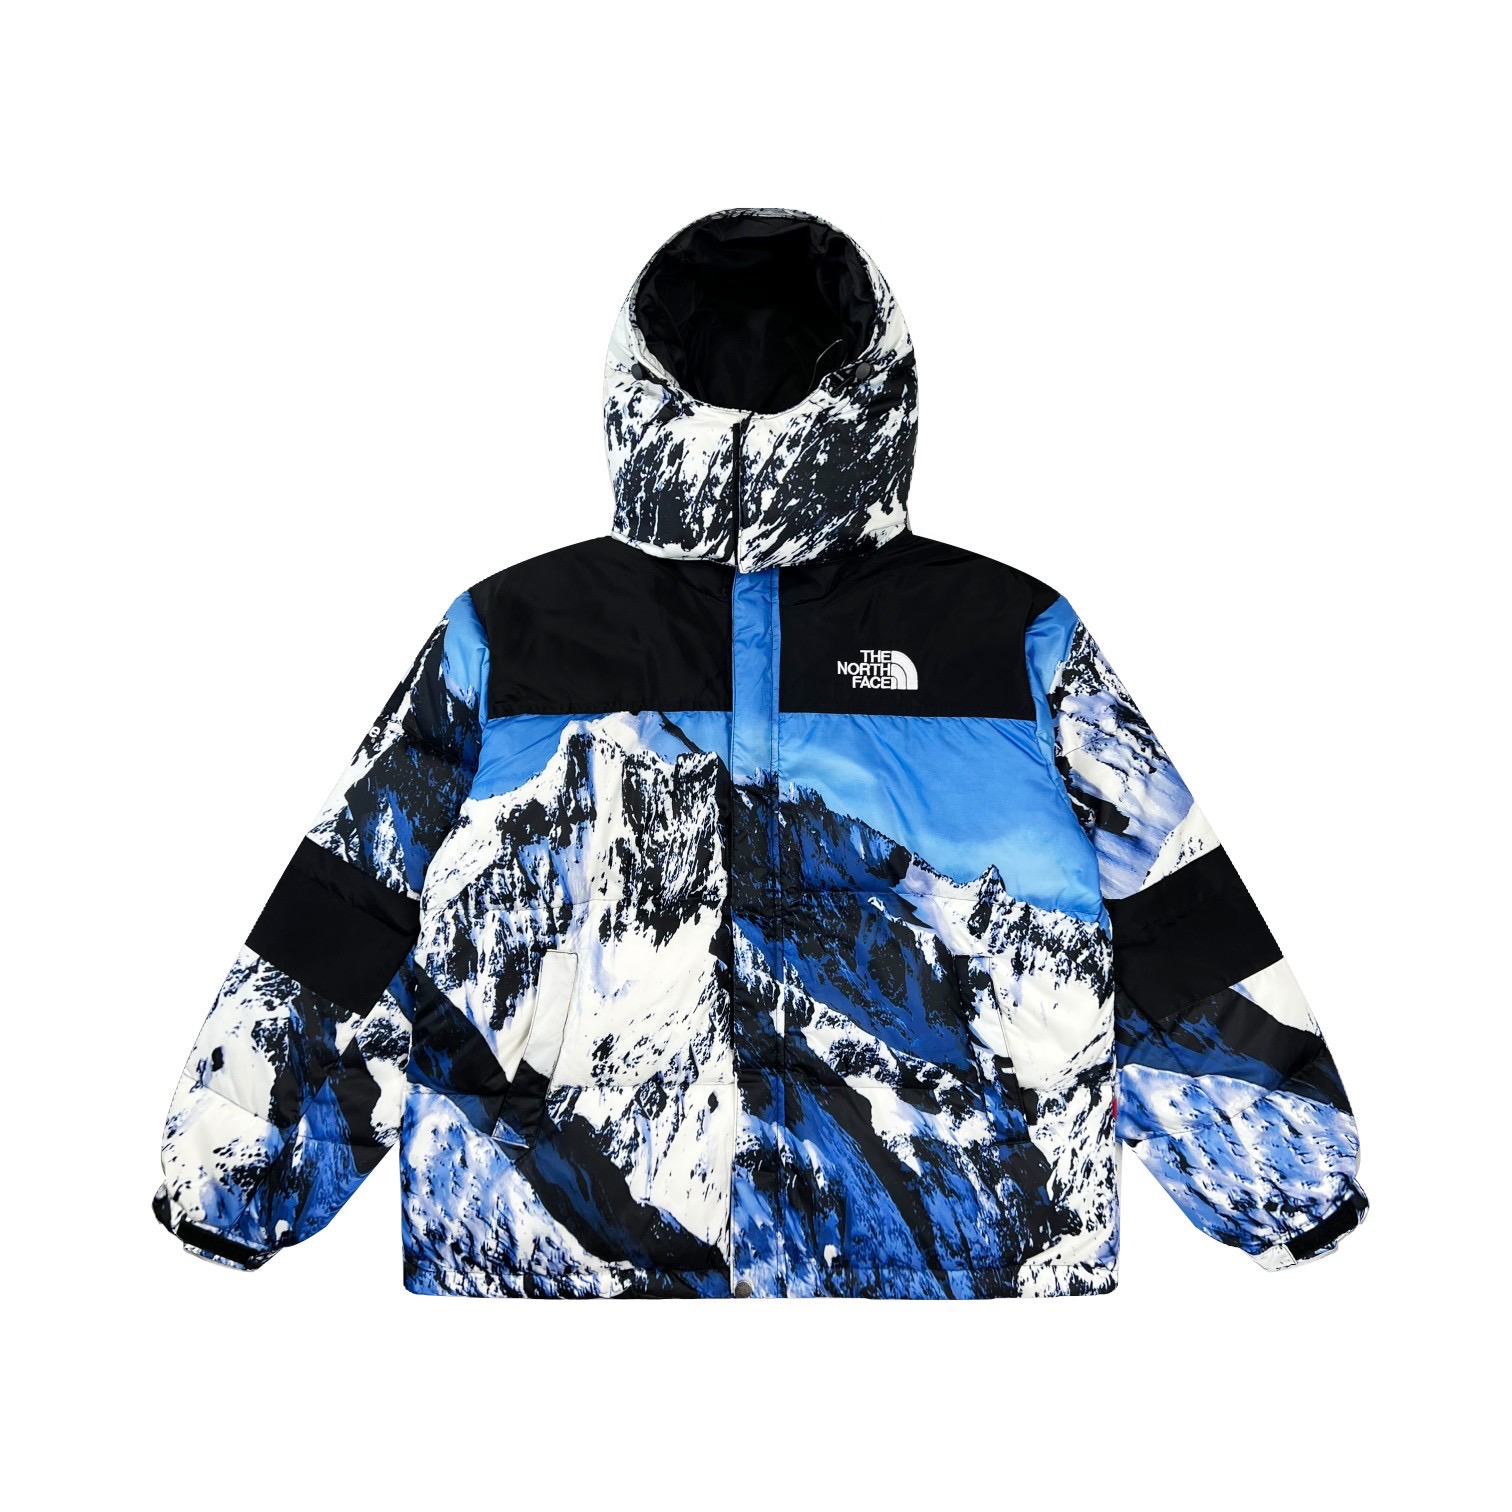 US$ 149.25 - Snow mountain hooded down jacket - www.youngrich.co